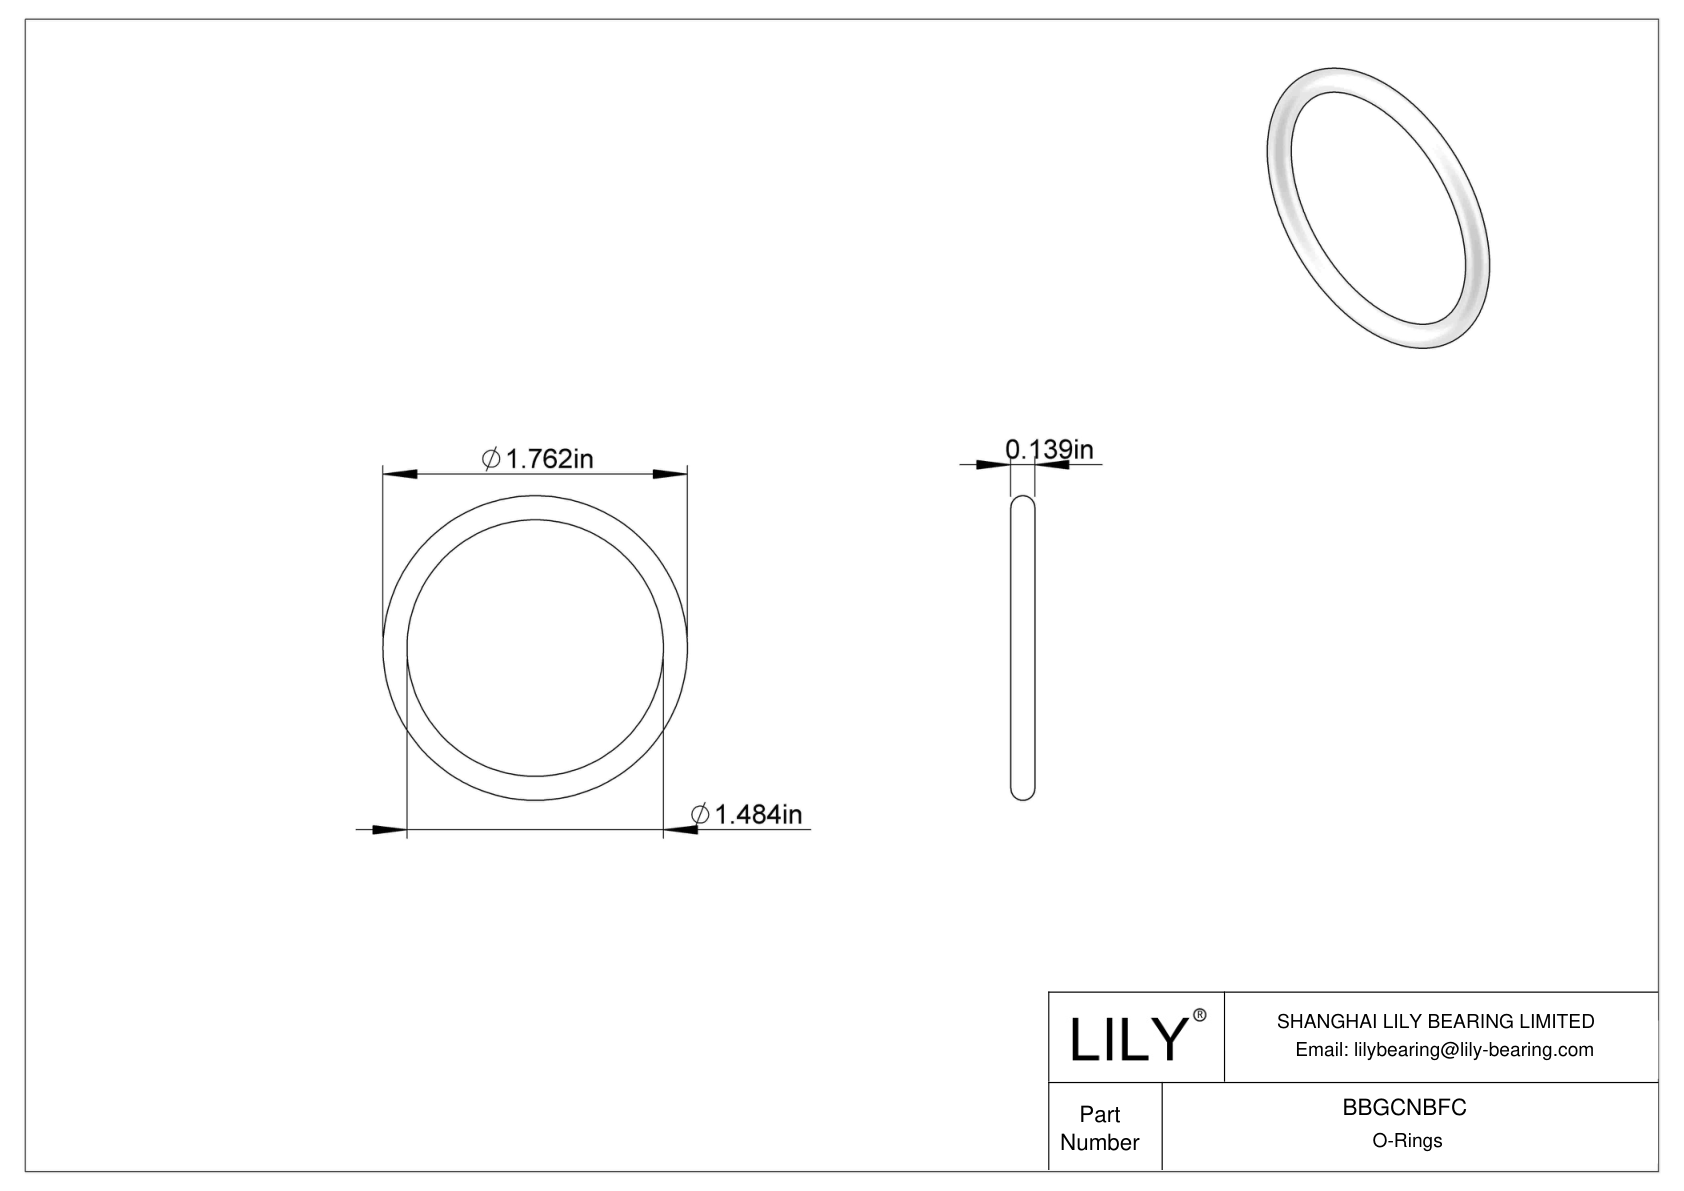 BBGCNBFC High Temperature O-Rings Round cad drawing